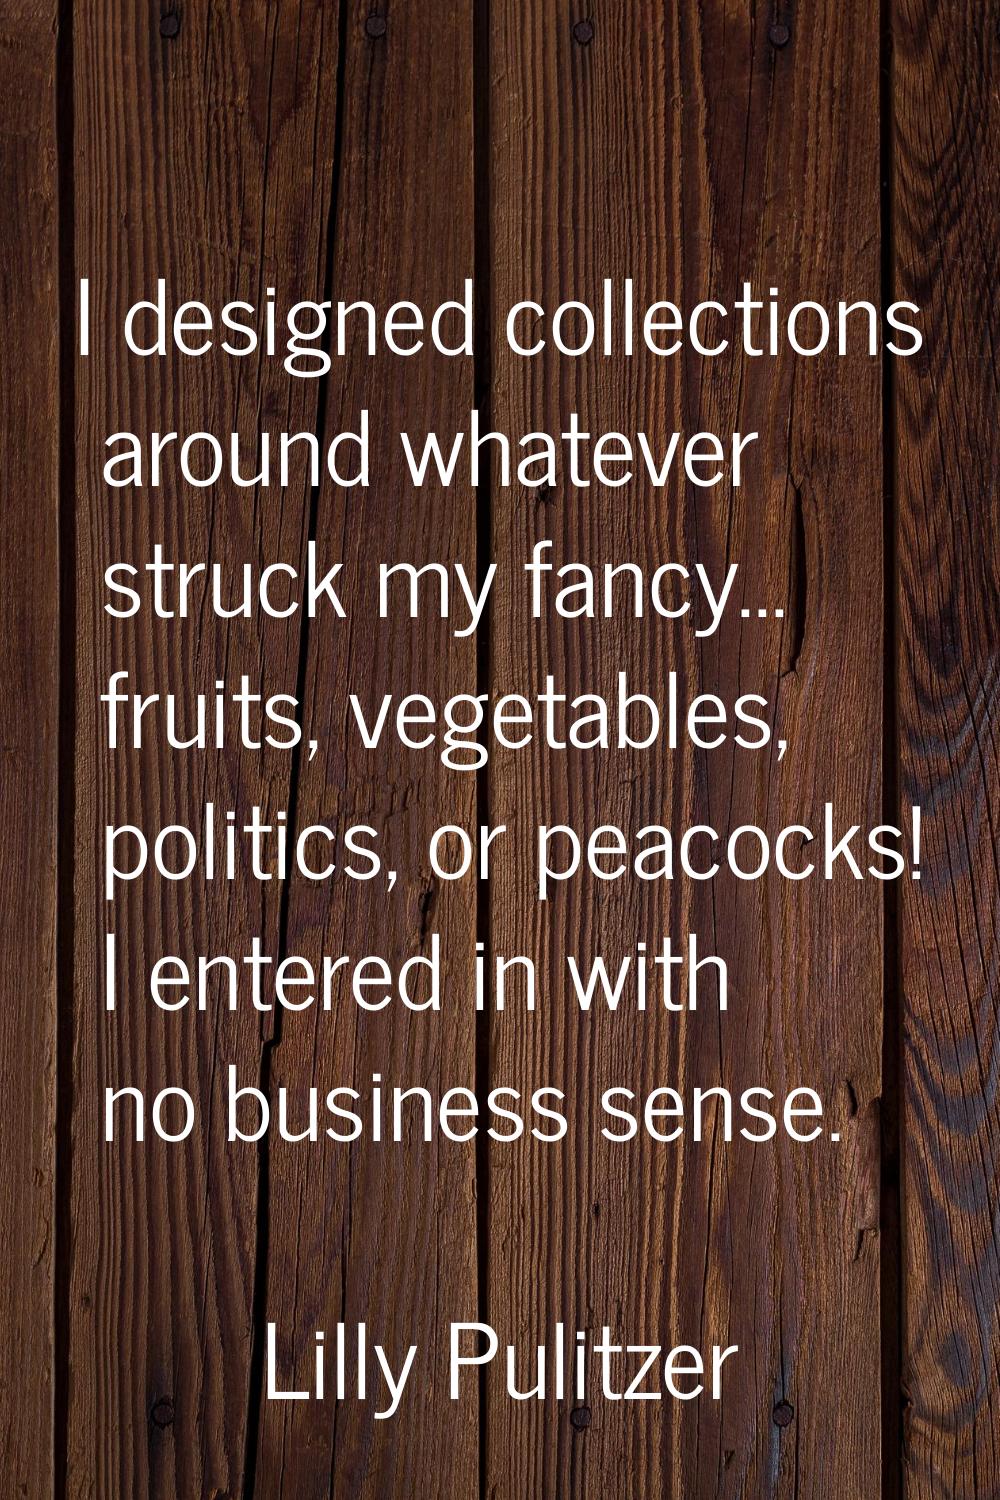 I designed collections around whatever struck my fancy... fruits, vegetables, politics, or peacocks